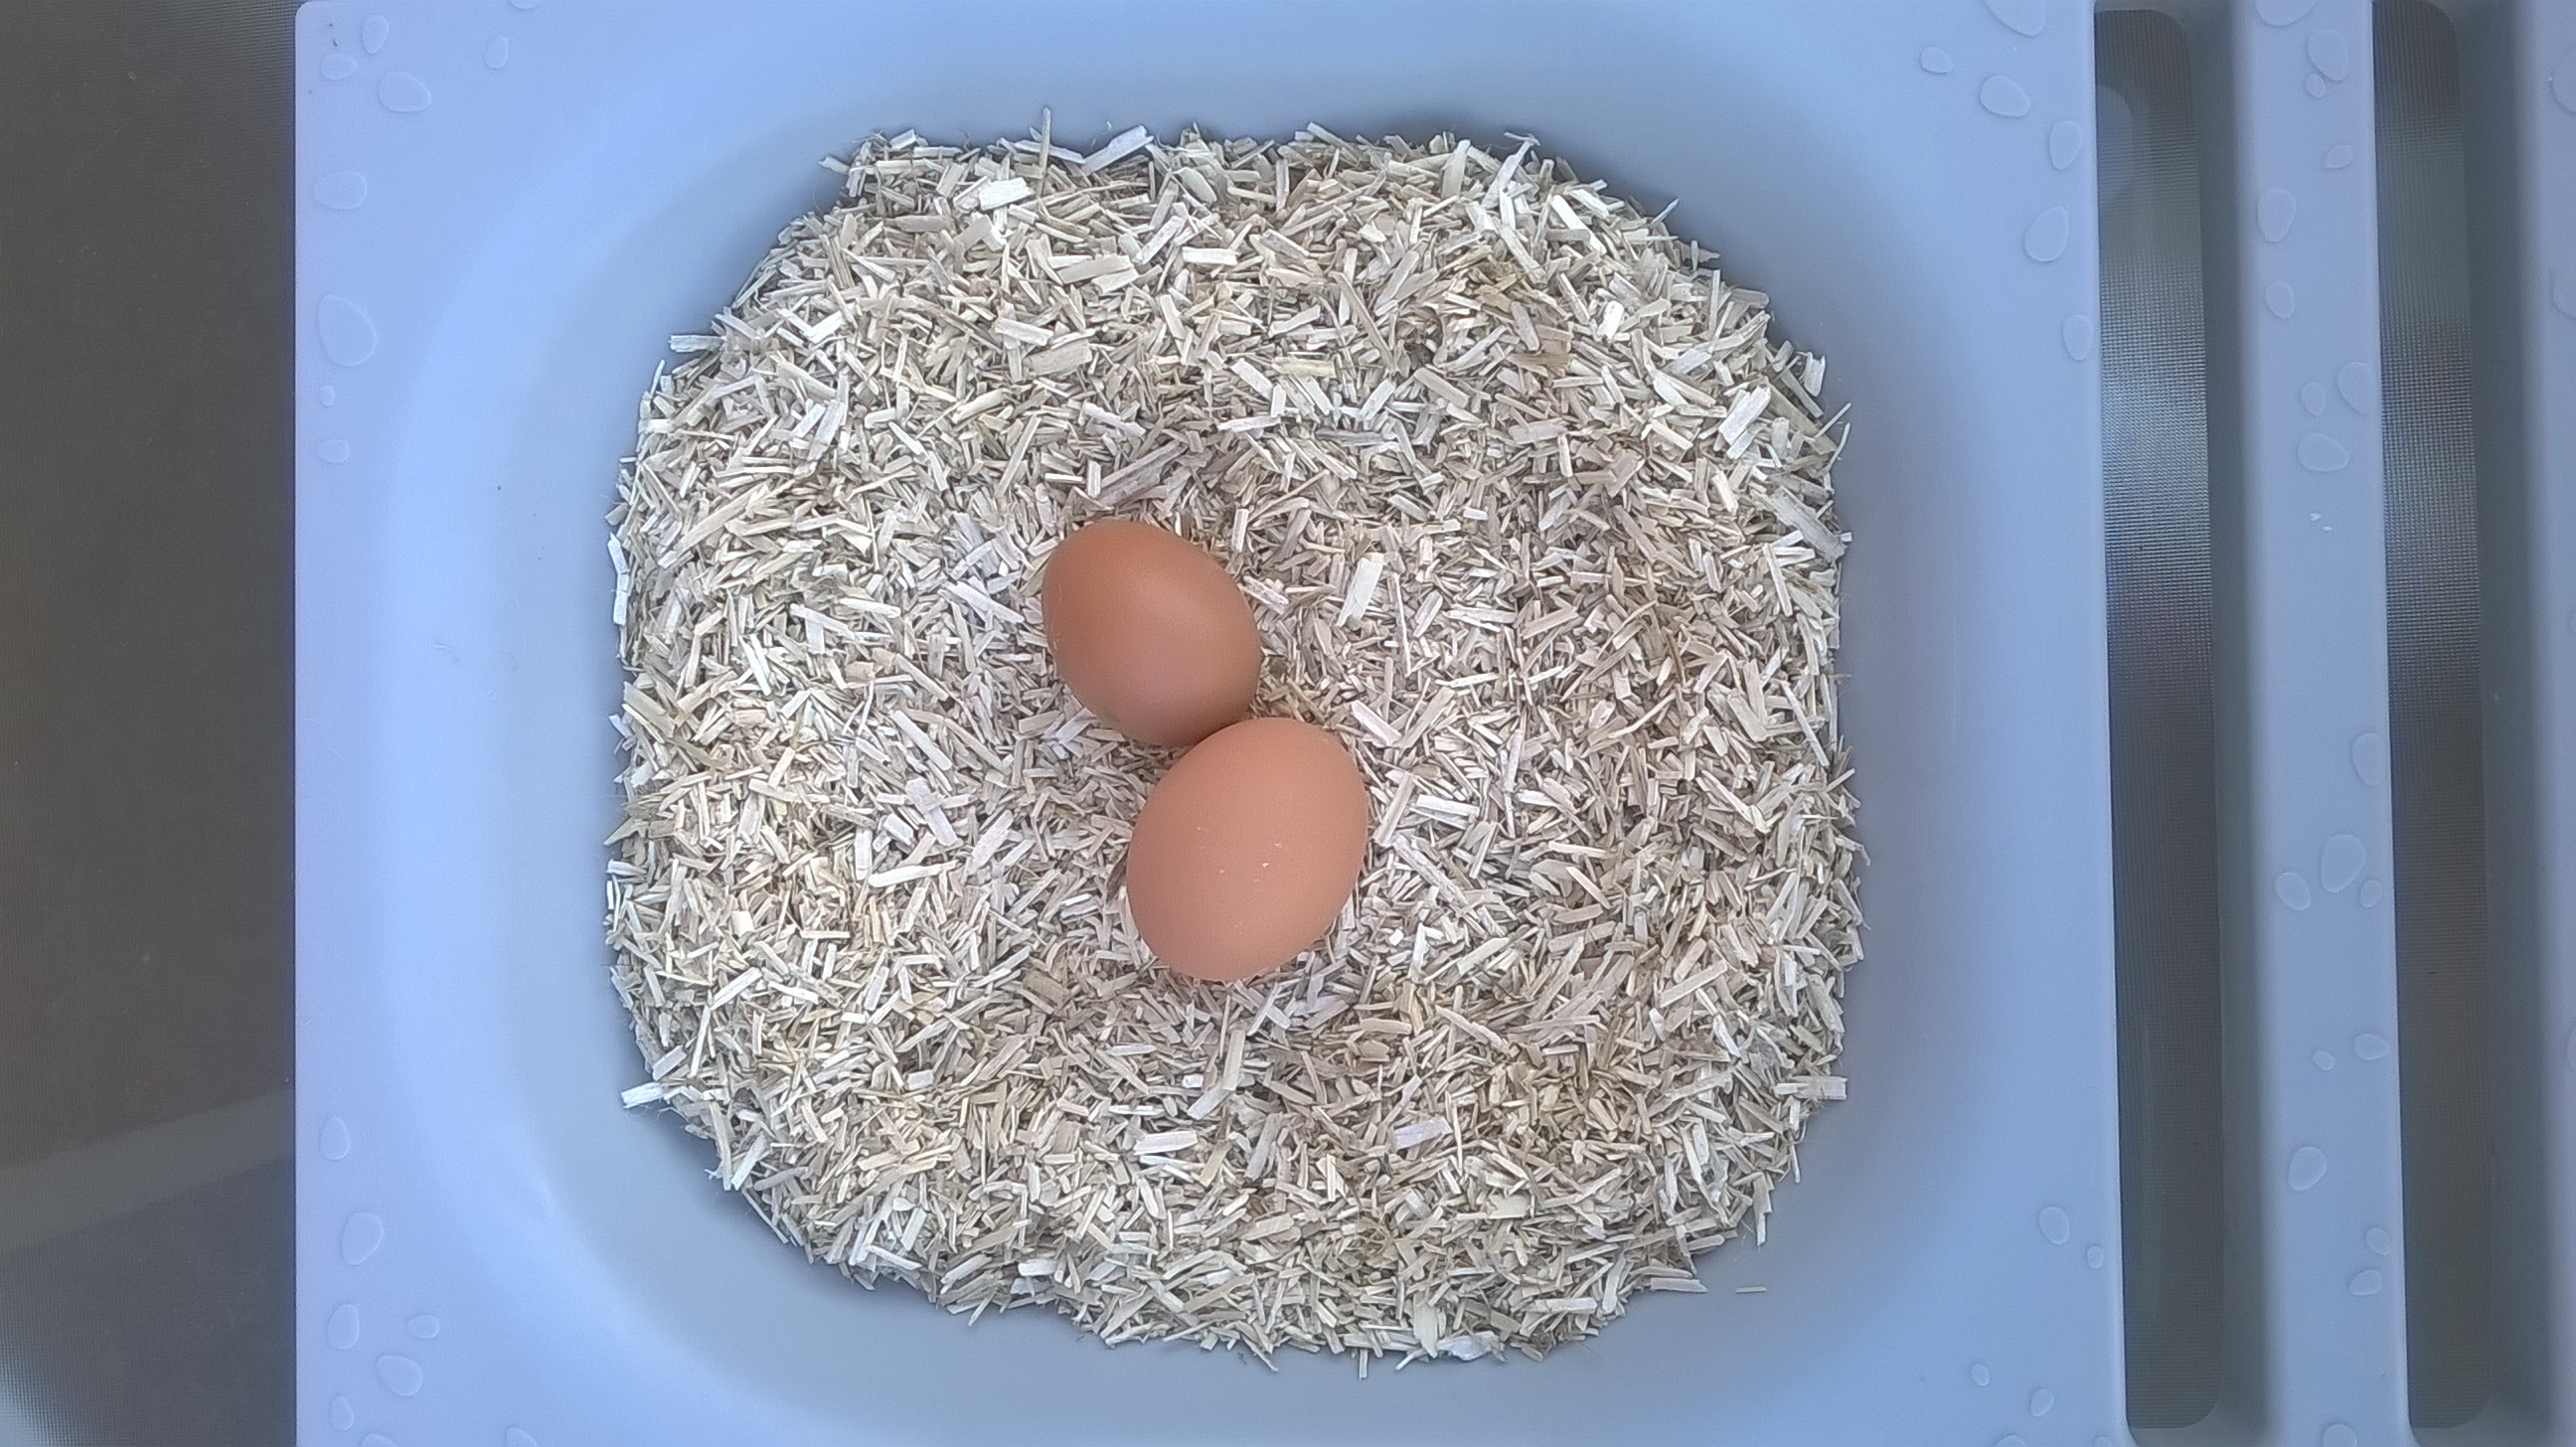 Aubiose is comfortable and absorbent in the nesting box - fresh eggs courtesy of Daphne and Margo!